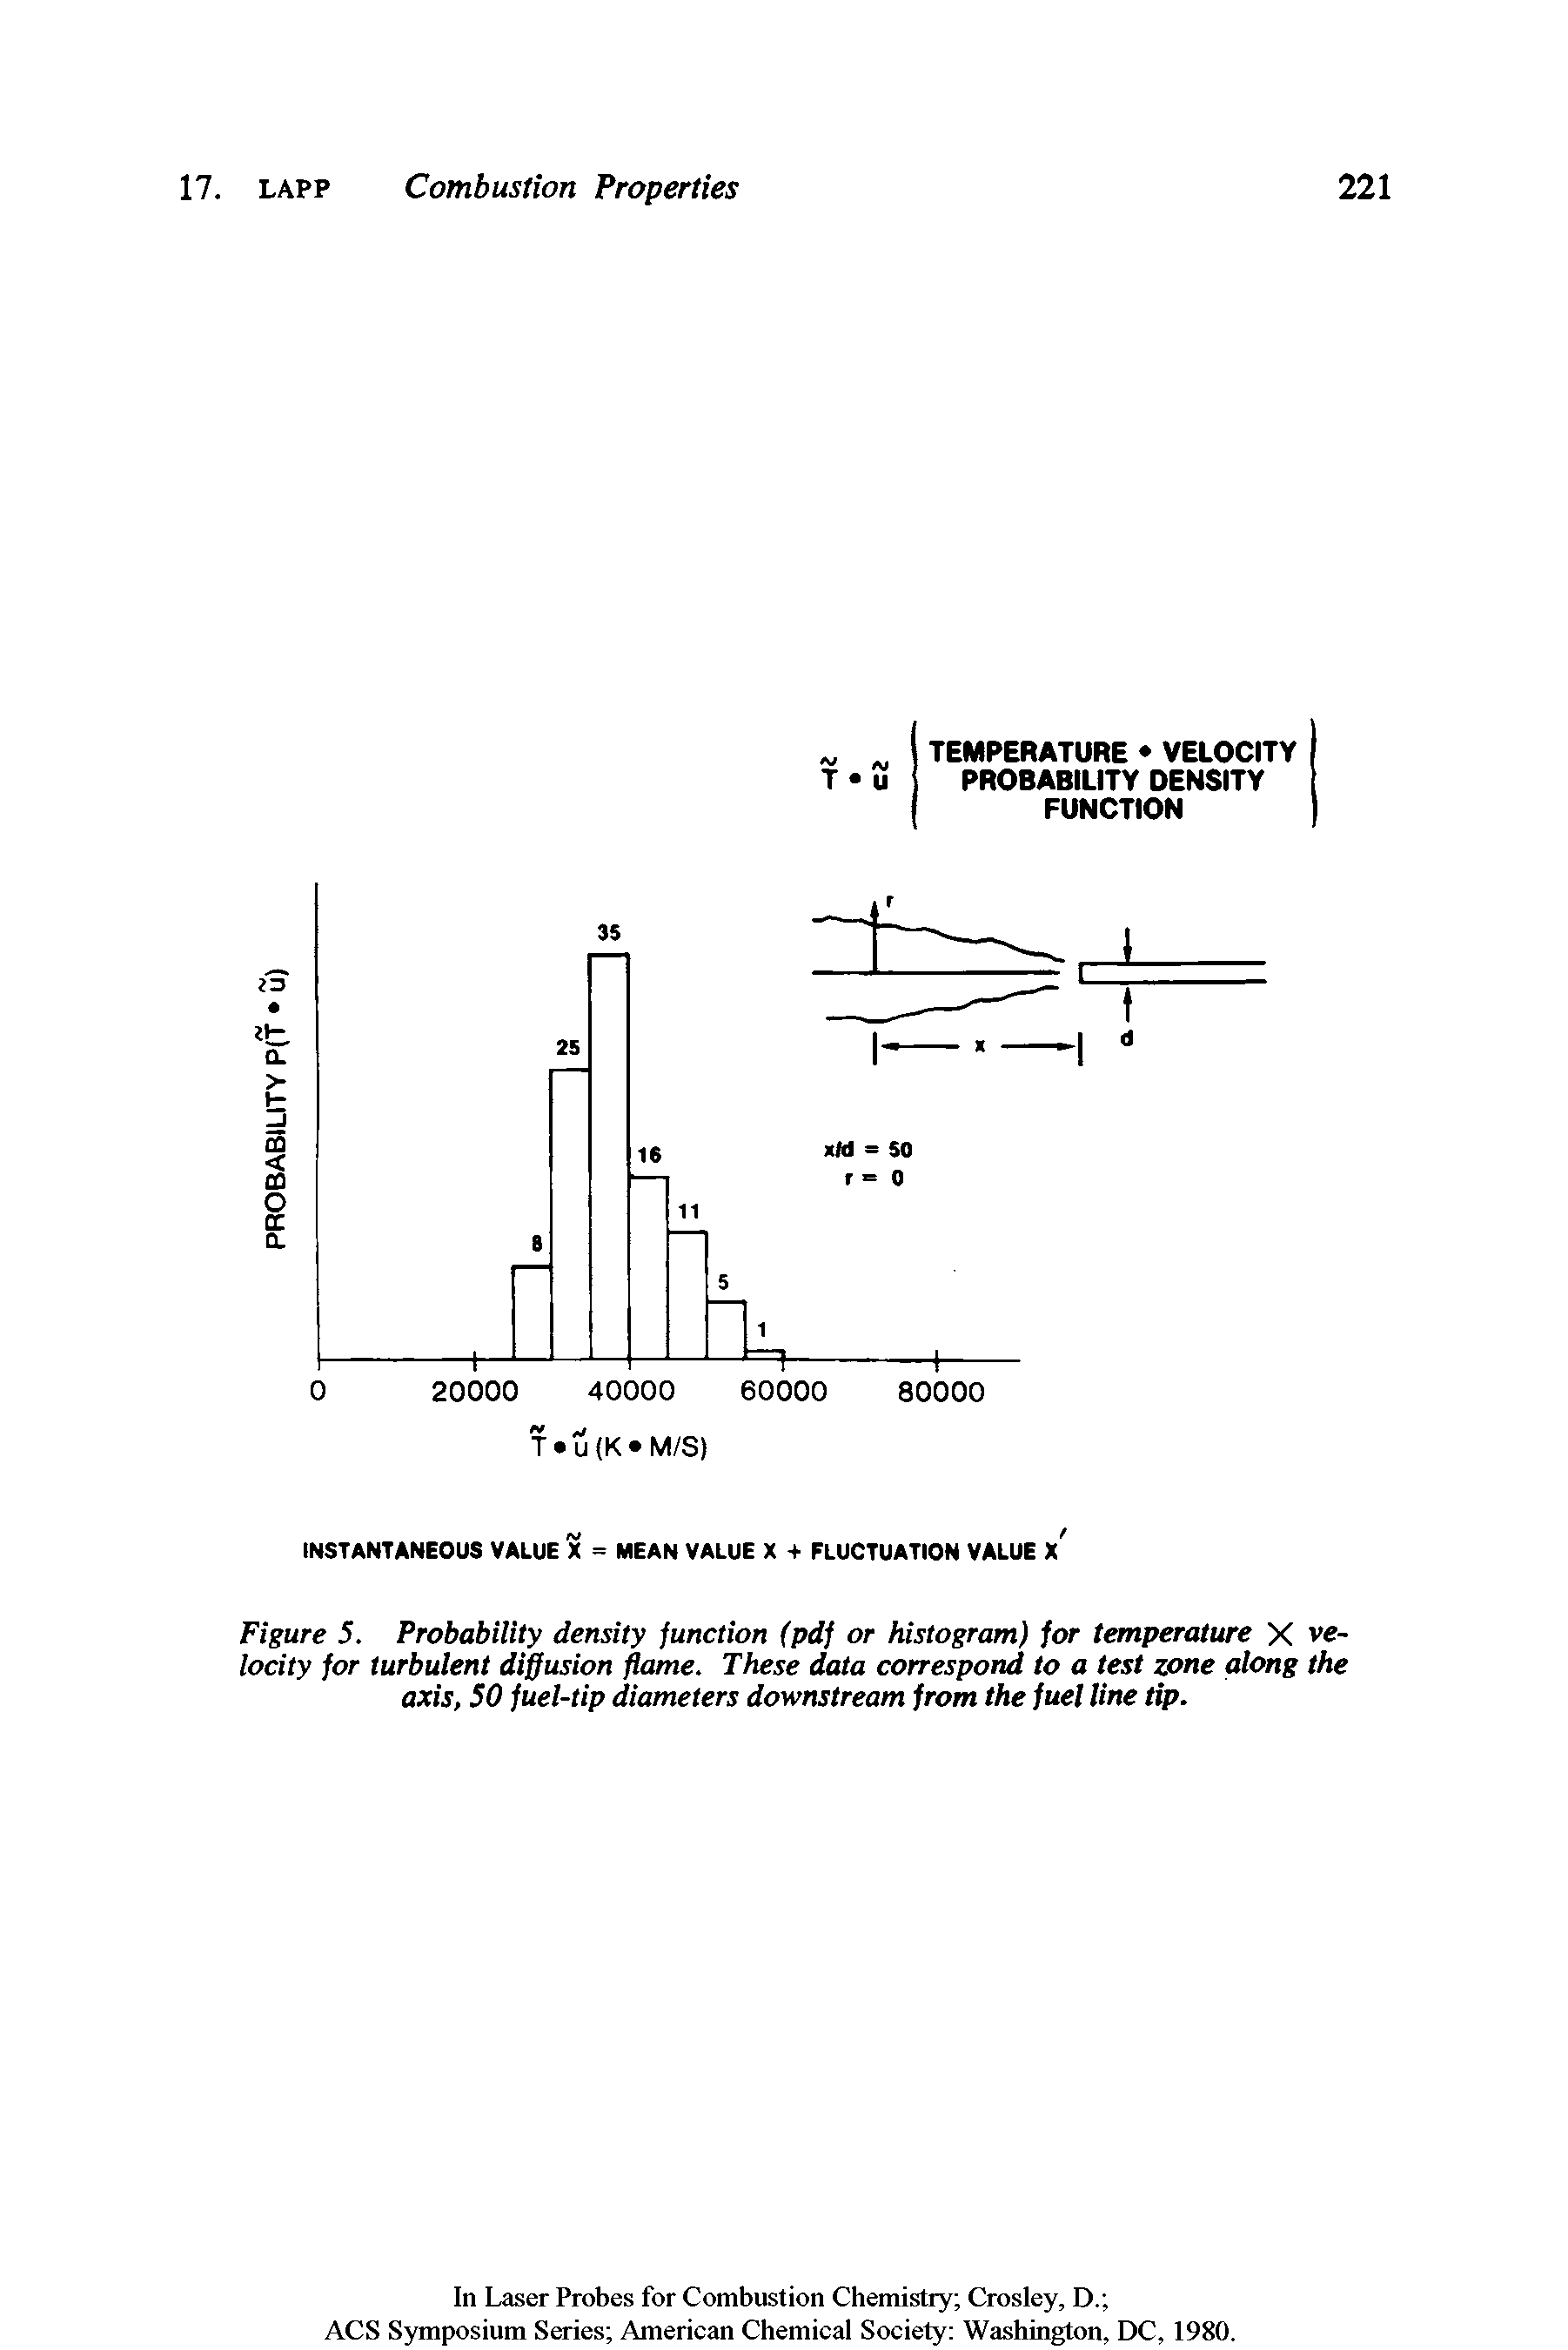 Figure 5. Probability density function (pdf or histogram) for temperature X velocity for turbulent diffusion flame. These data correspond to a test zone along the axis, 50 fuel-tip diameters downstream from the fuel line tip.